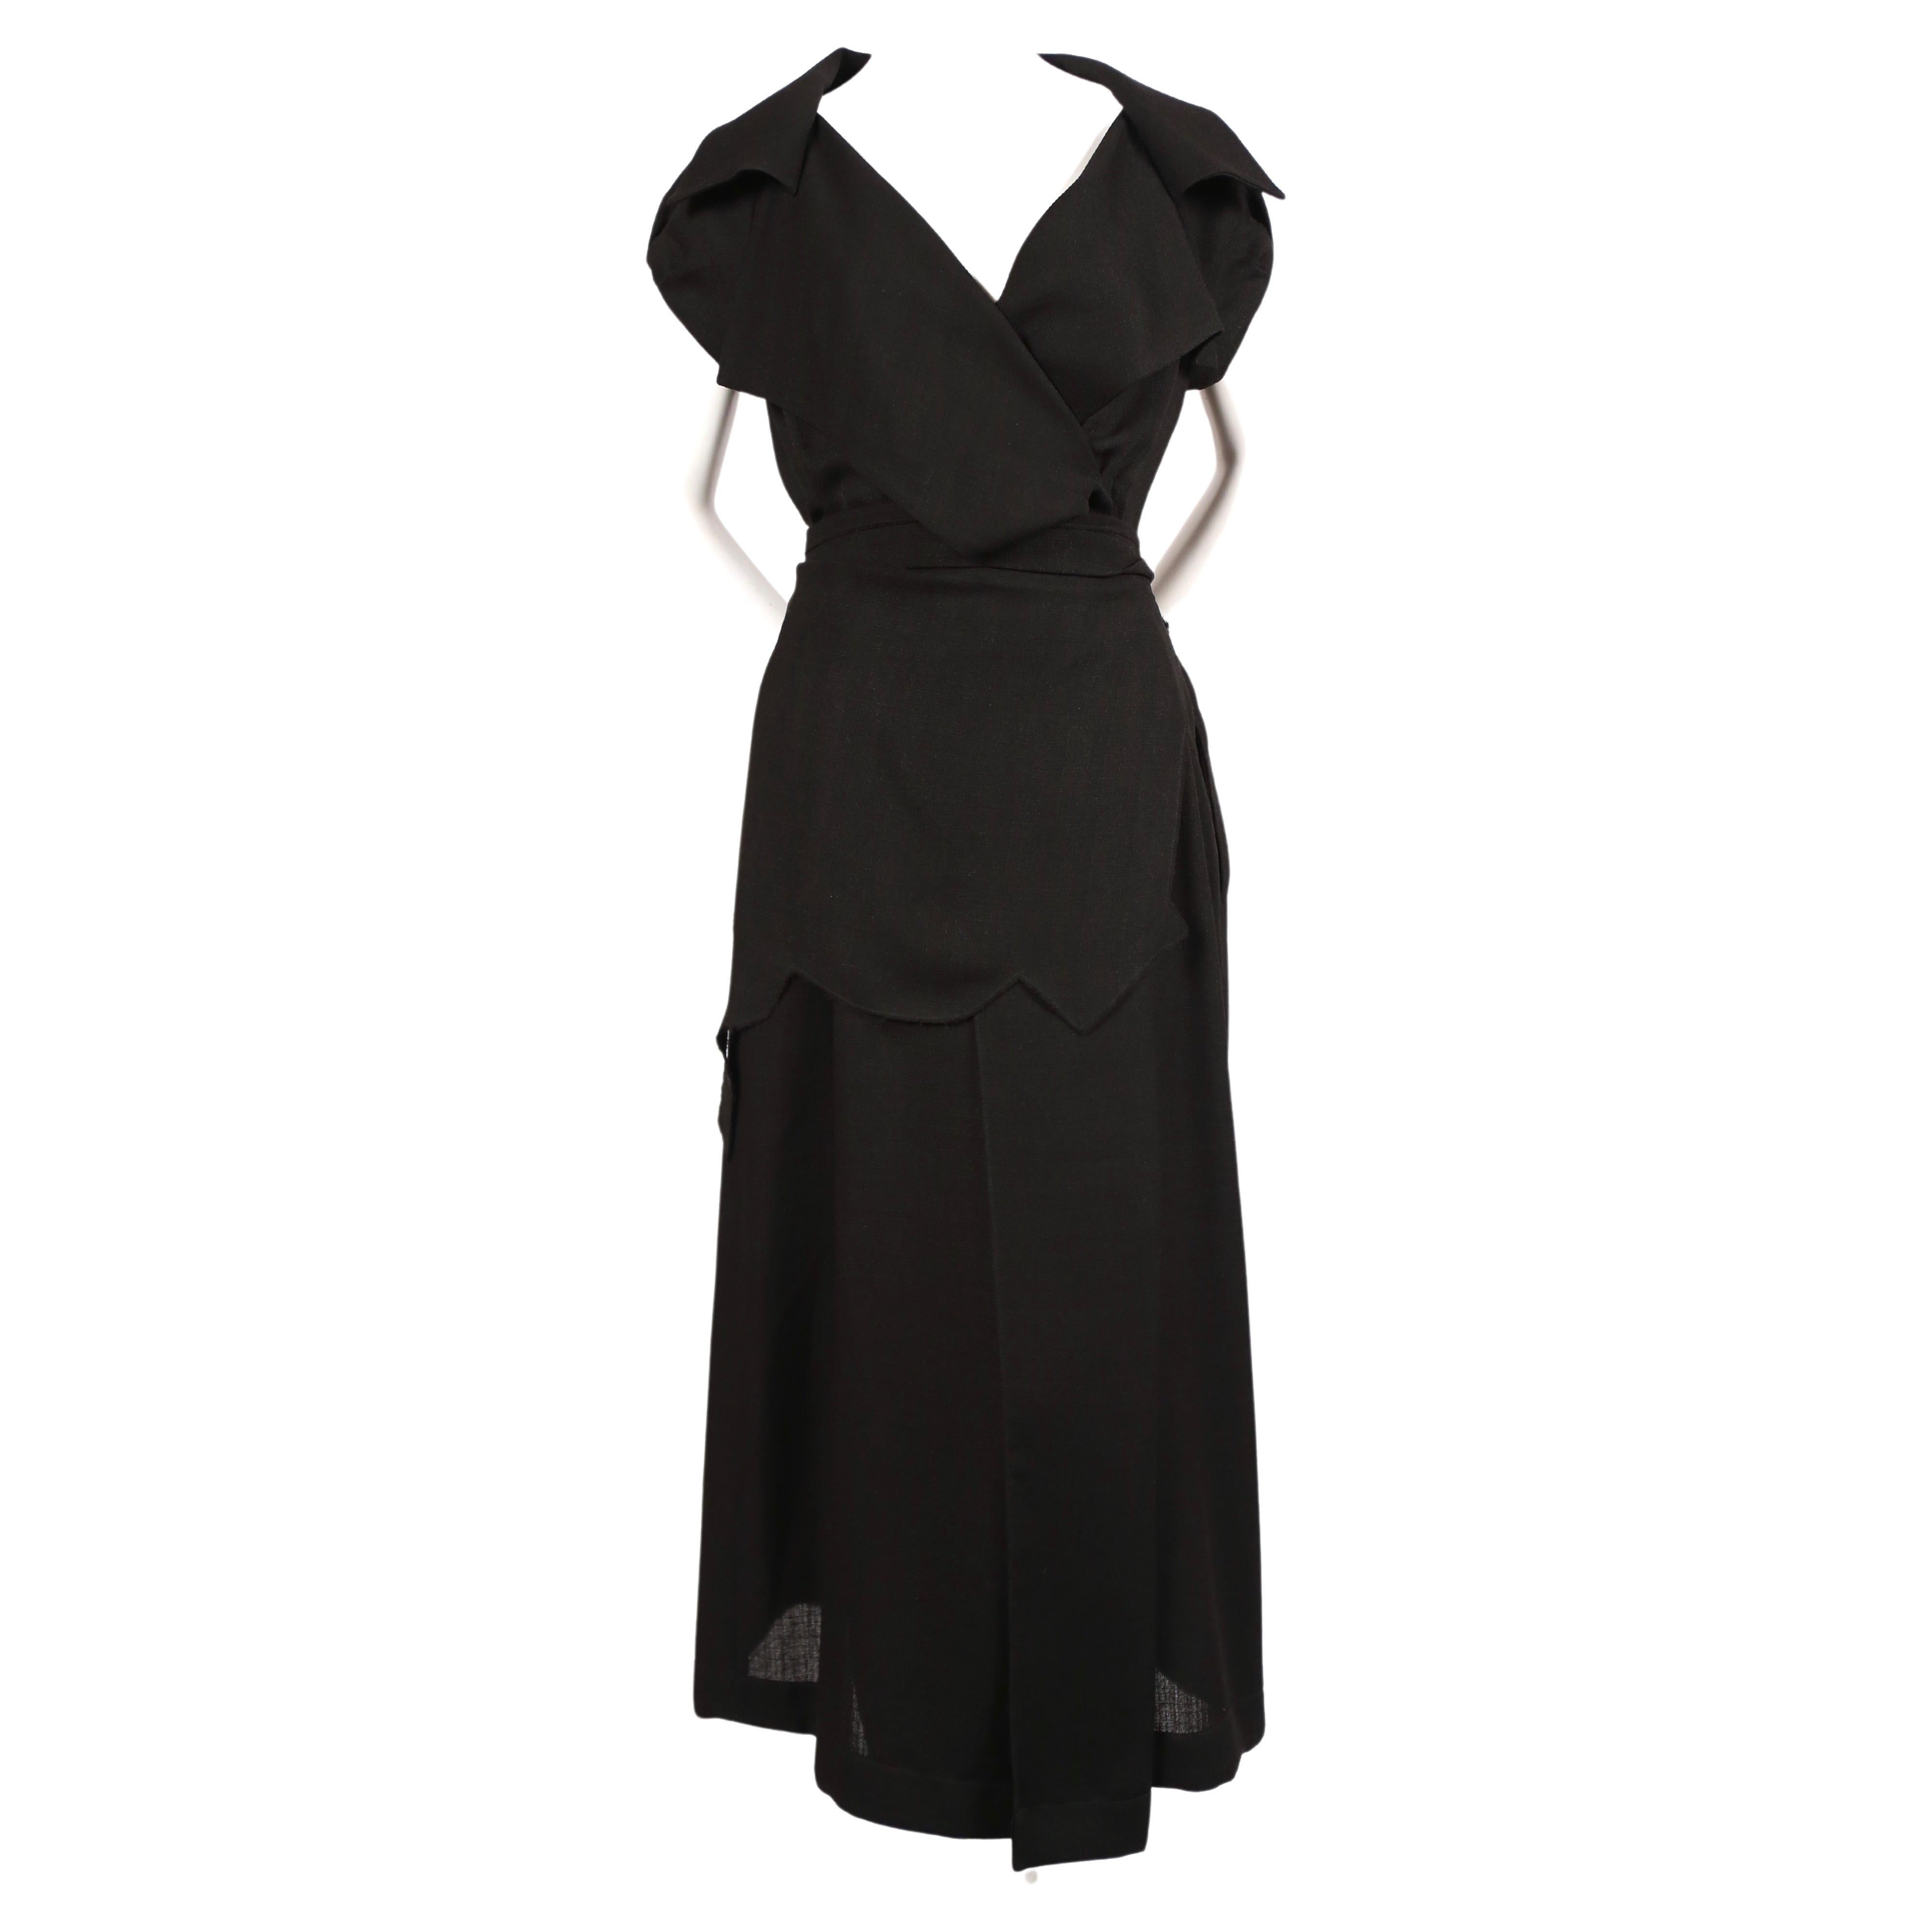 Black asymmetrical dress with raw edges and waist tie designed by Jonathan Anderson for Loewe exactly as seen on the spring 2015 runway. European size 36 which best fits a US 2-4. Approximate measurements: maximum waist 28